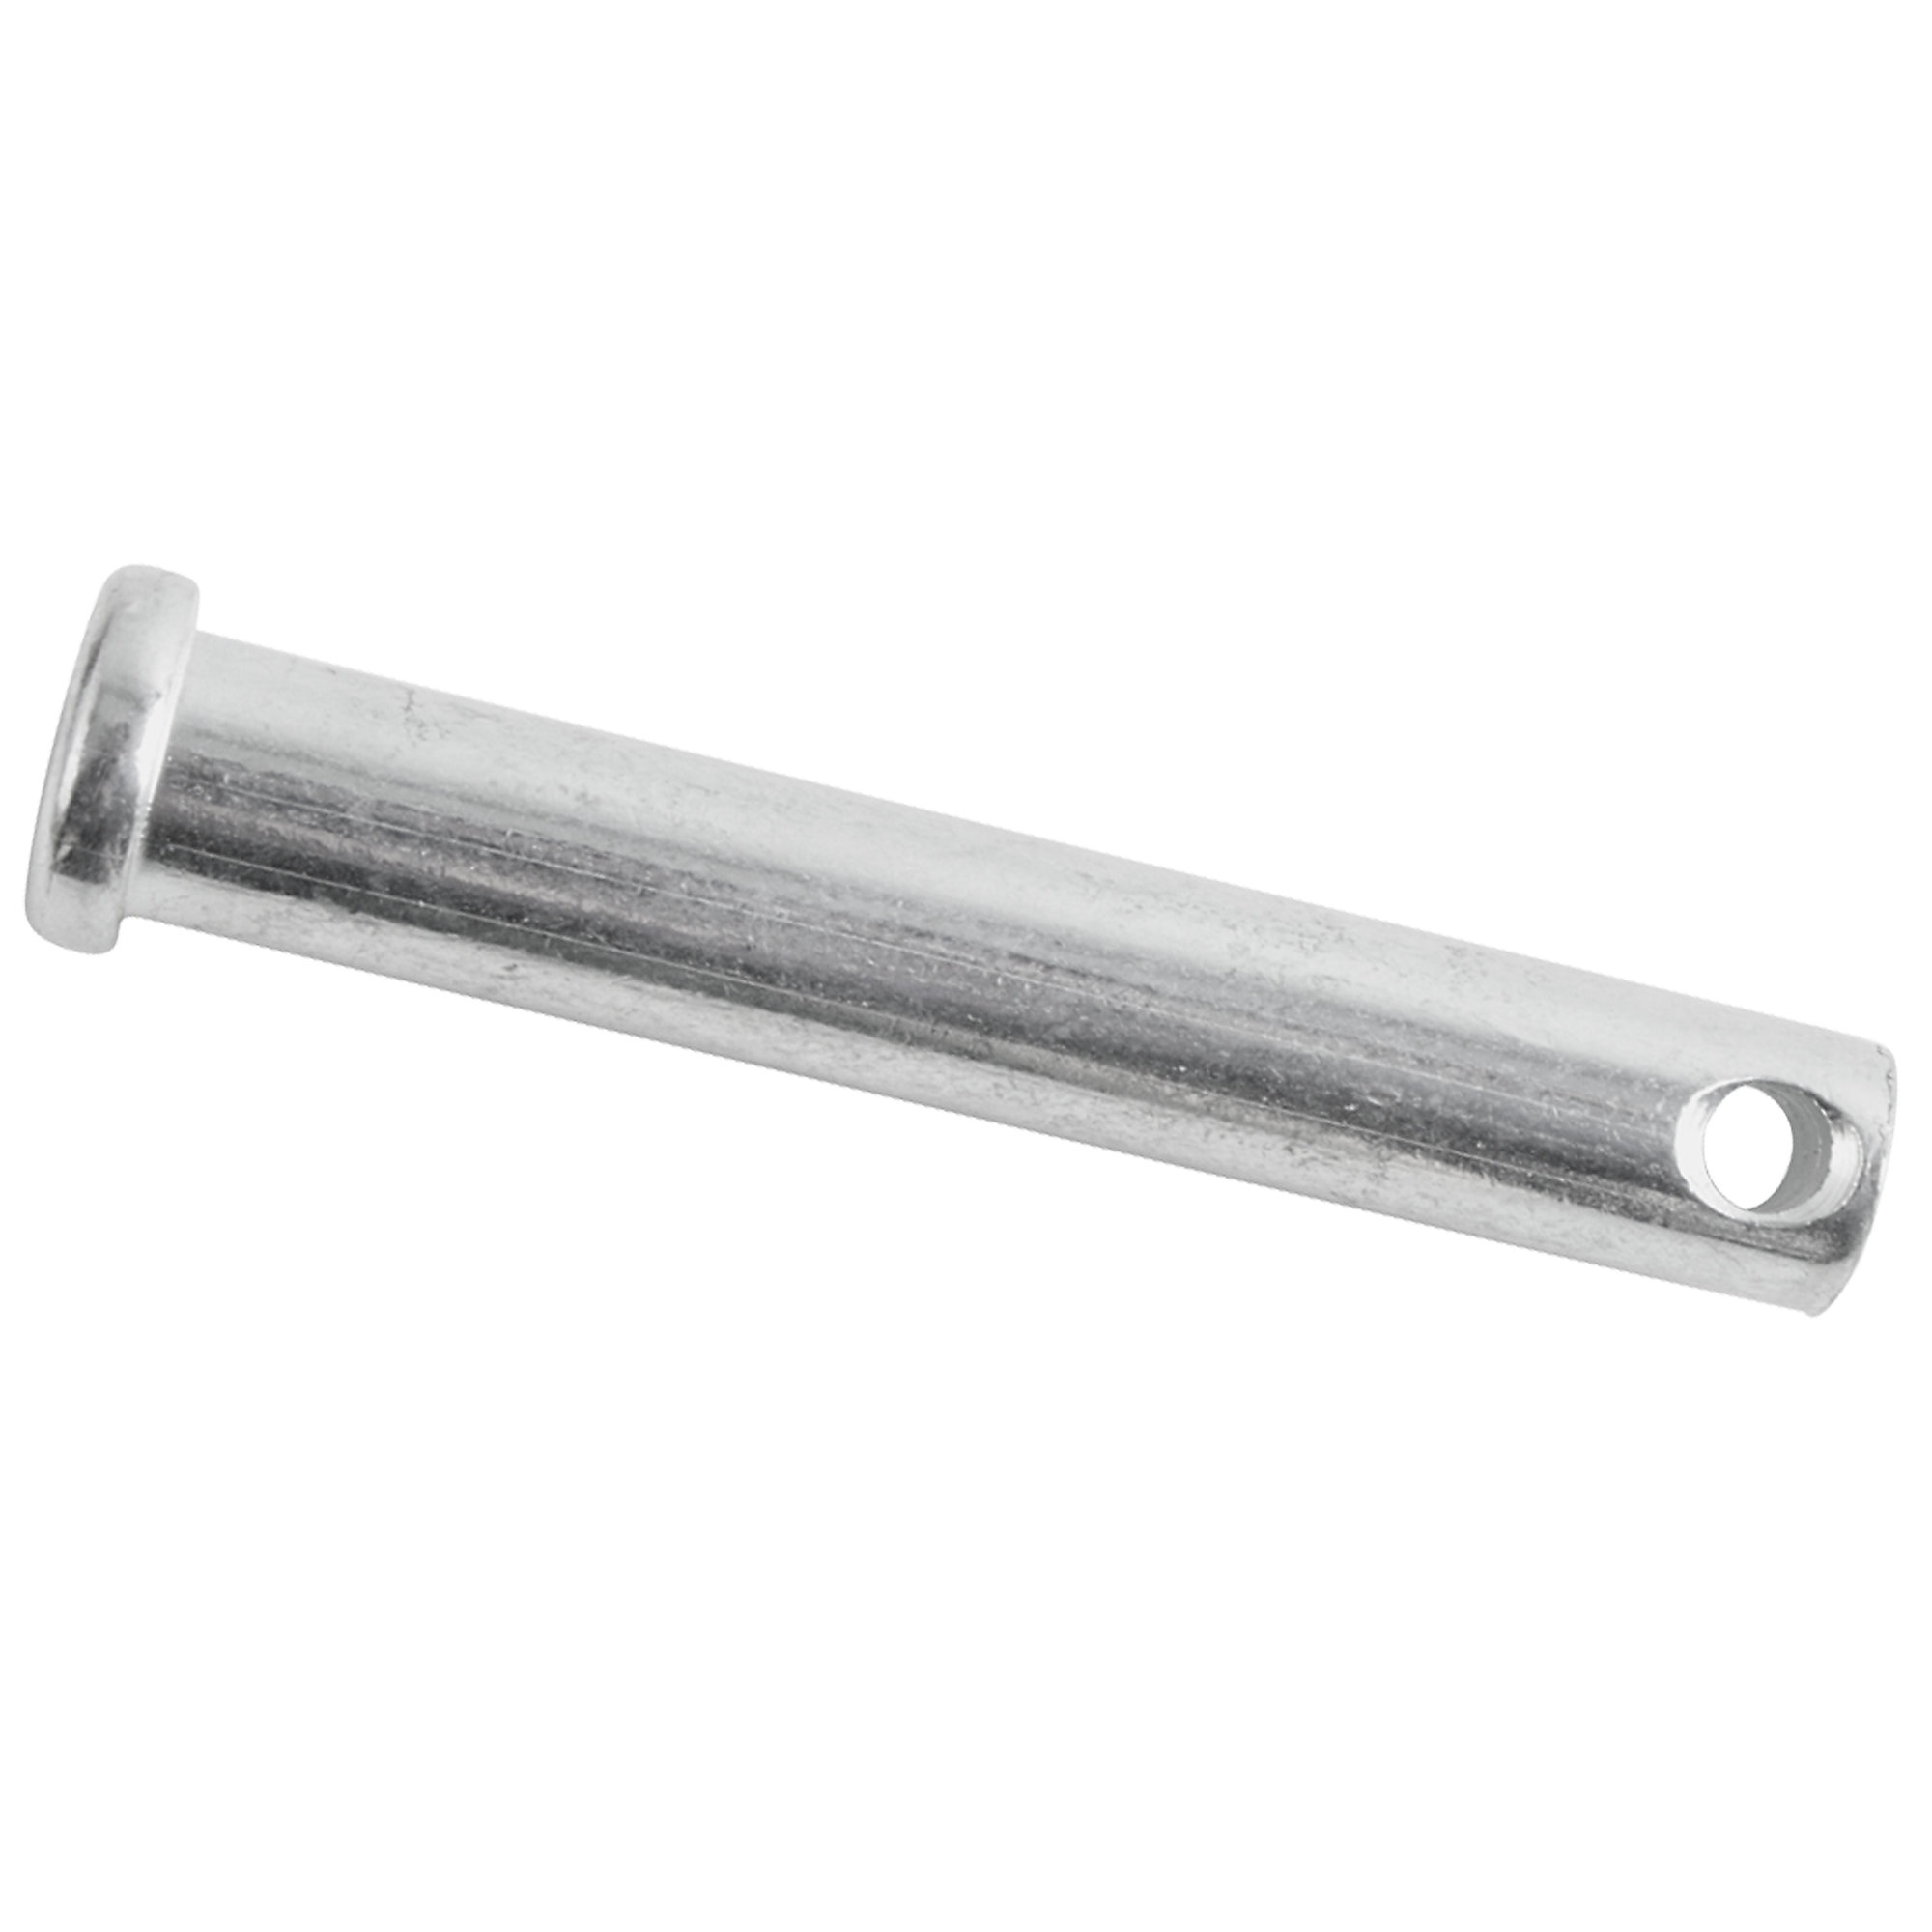 Clevis Pin, 3/8 X 28